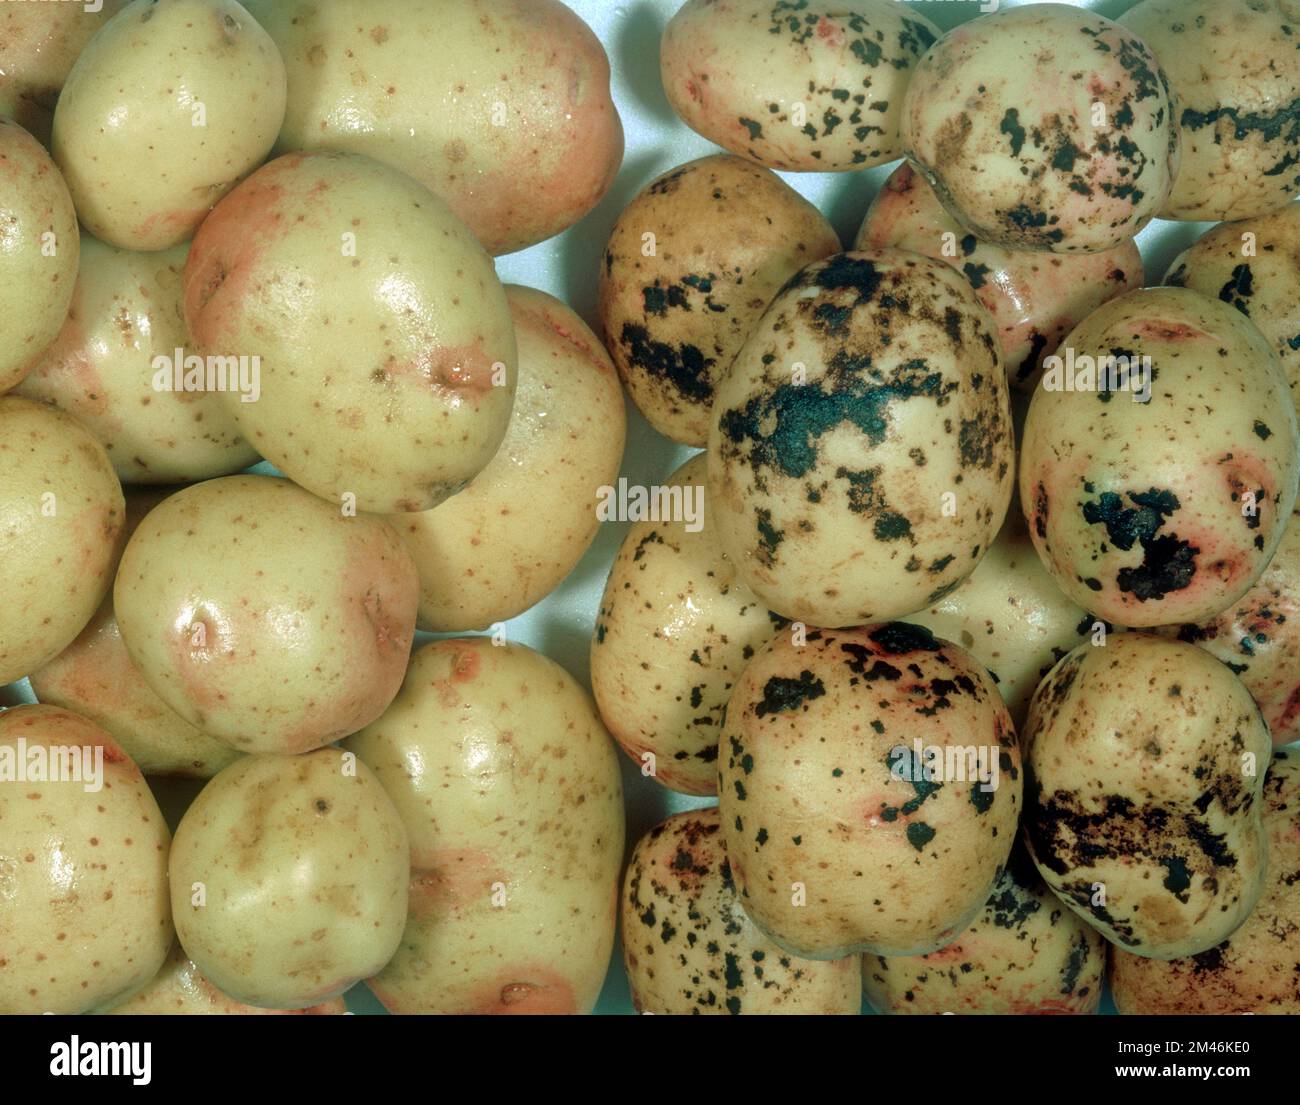 Black scurf (Rhizoctonia solani) fungal disease black canker lesions on the surface of potato tubers cv healthy tubers Stock Photo